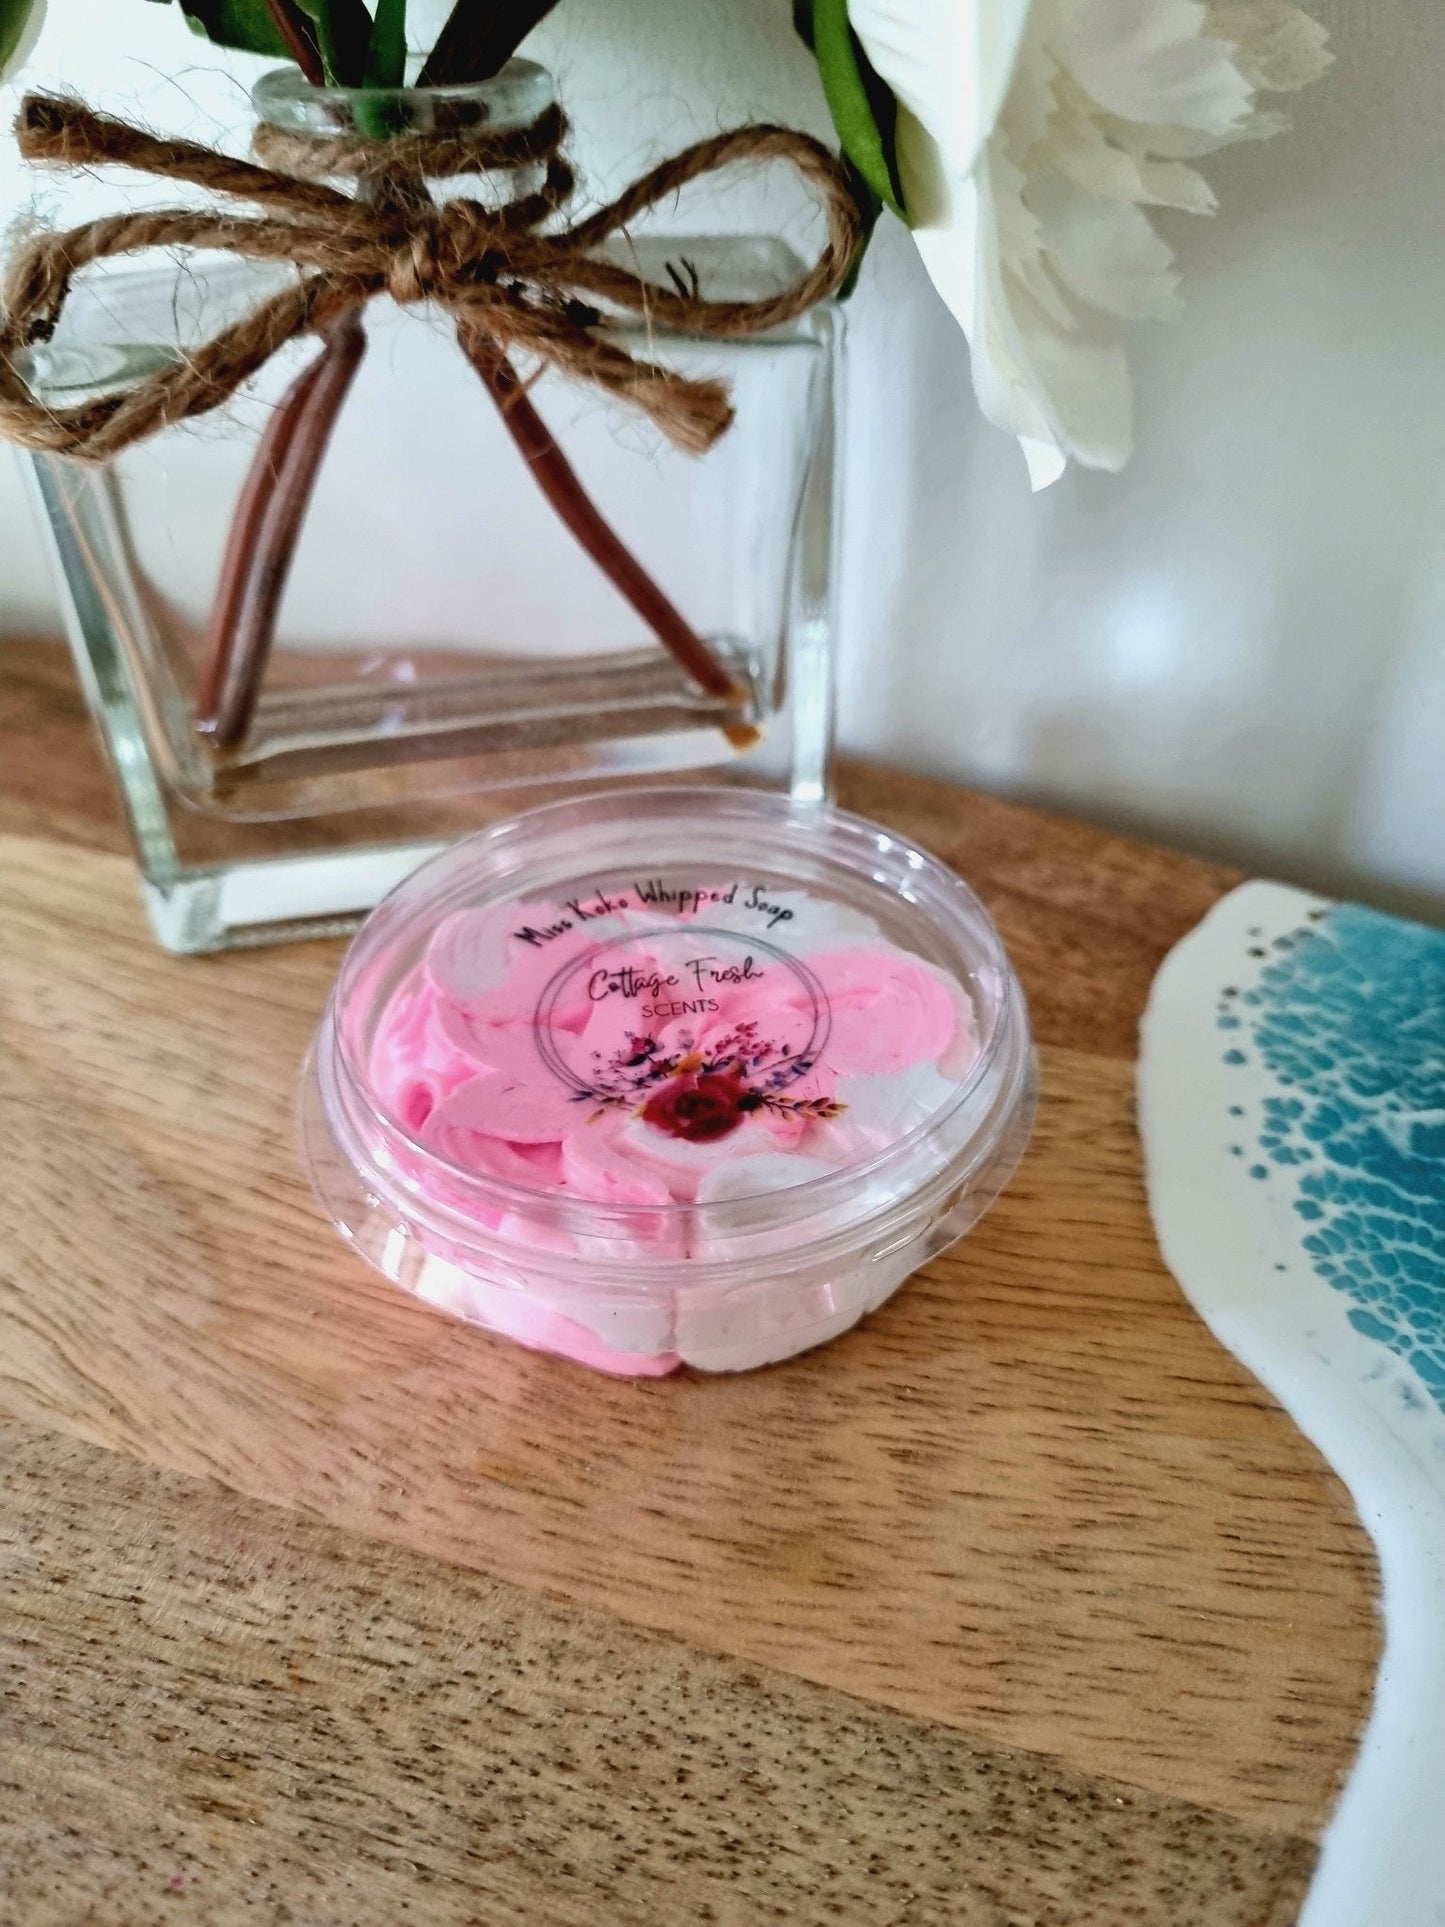 REDUCED TO CLEAR - Whipped Soap - Whipped Soap - Cottage Fresh Scents